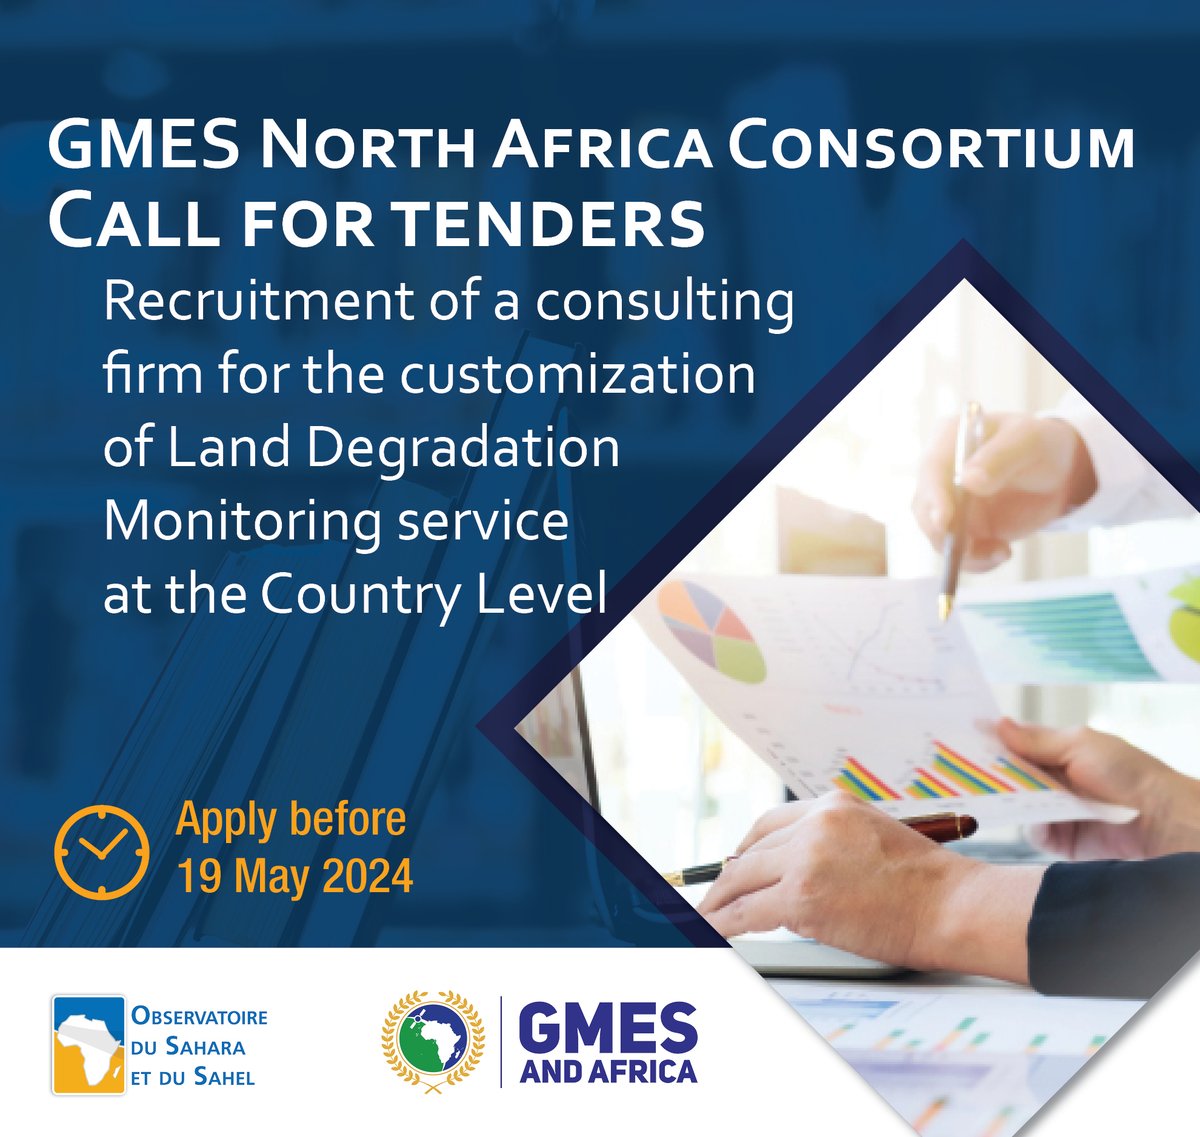 As part of the second phase of the GMES&Africa project, the Sahara and Sahel Observatory (OSS) is launching a call for tenders for the recruitment of a consultancy firm to customise the land degradation monitoring service at national level. oss-online.org/en/gmes-recrui…